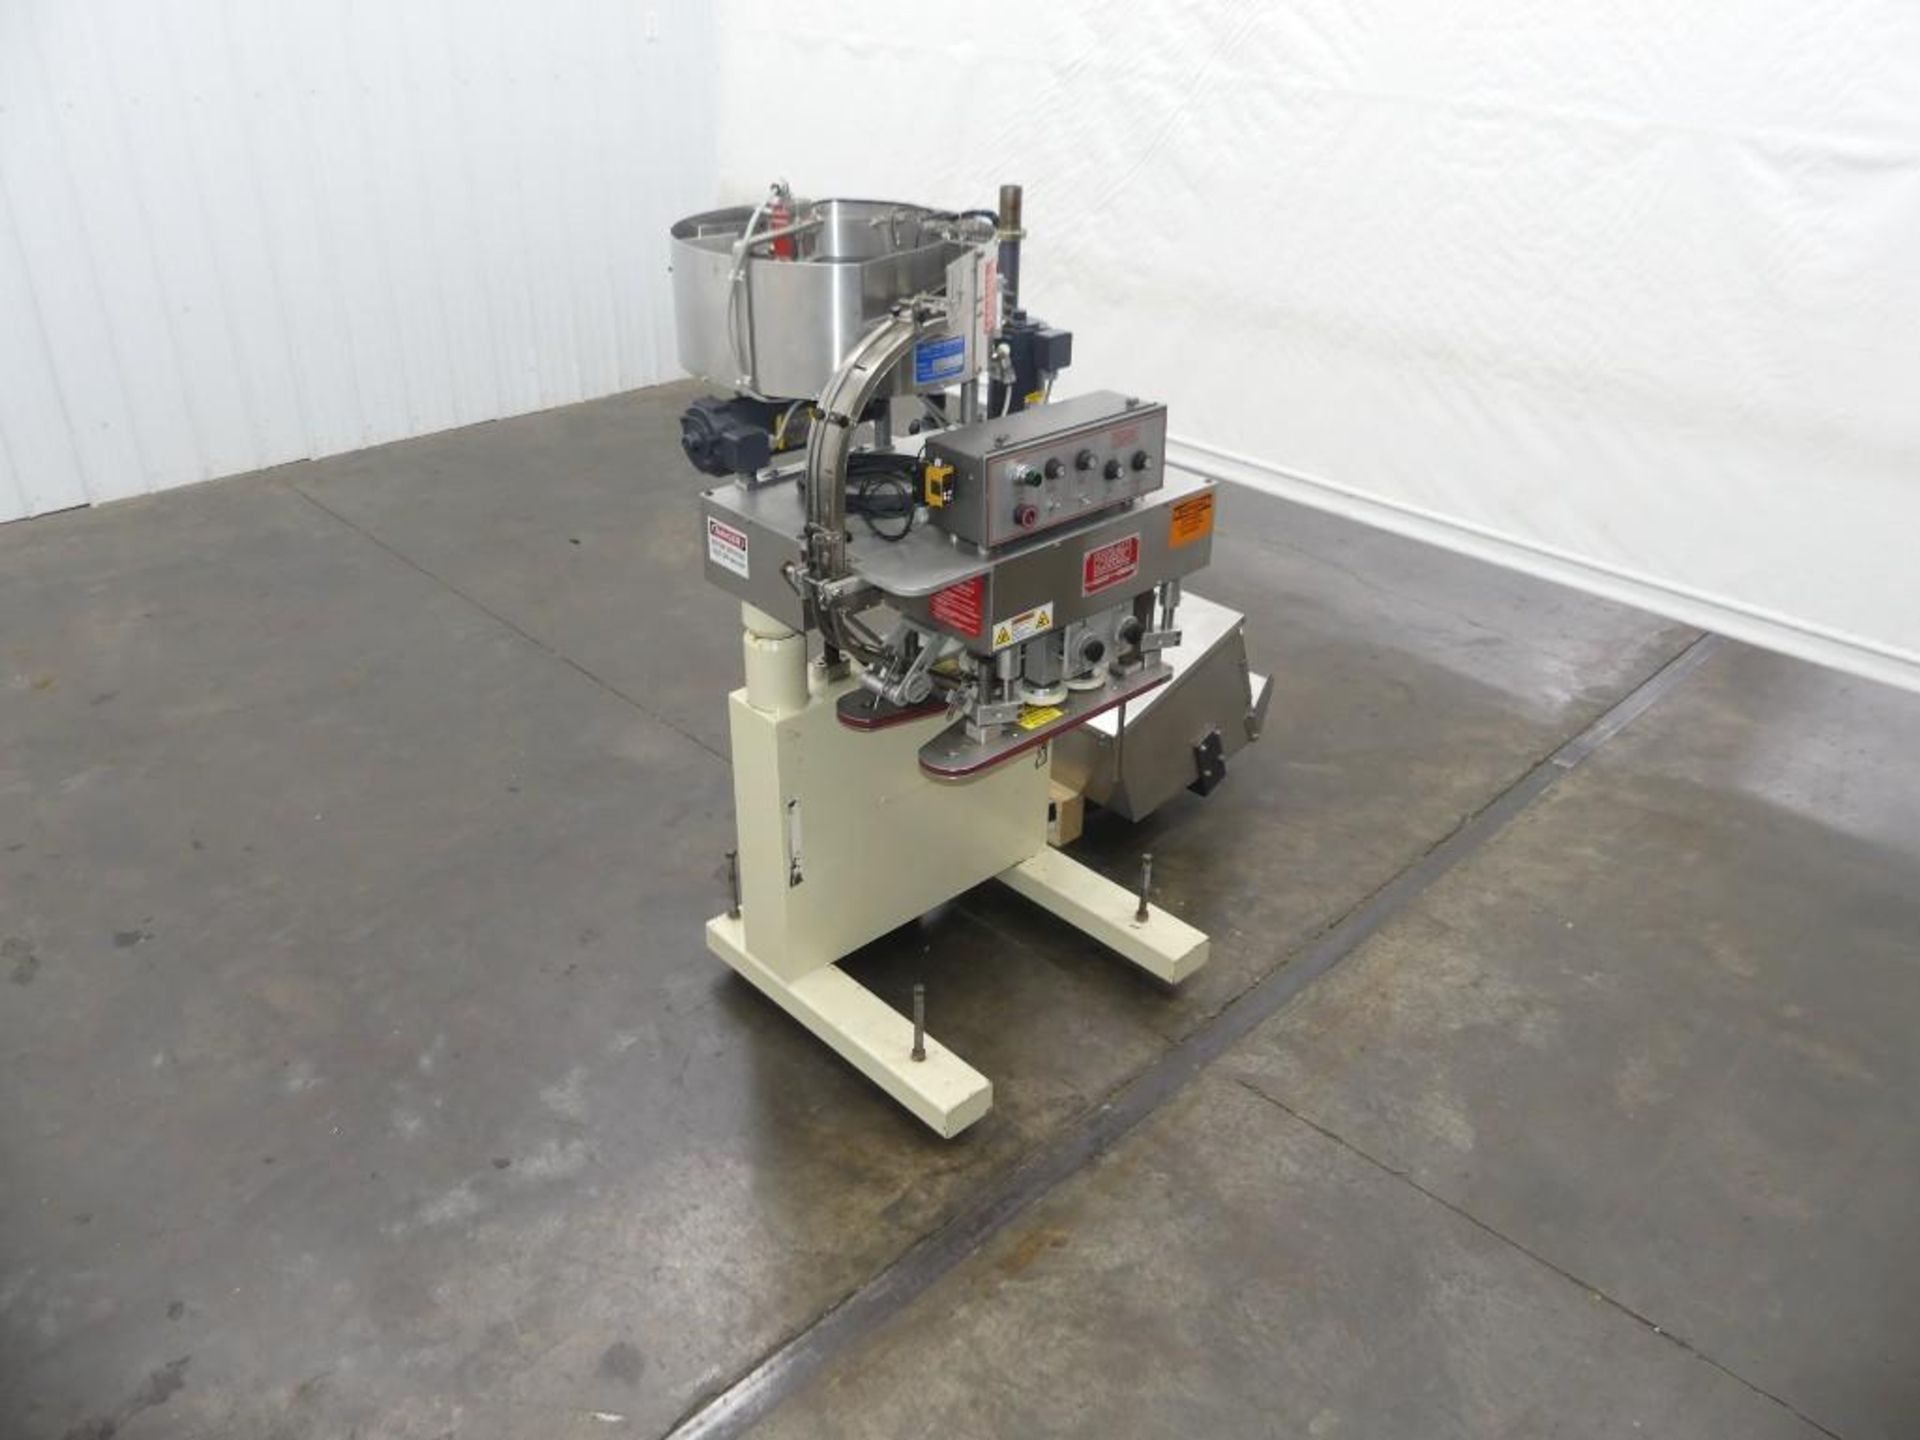 Kaps-All Model E4 Spindle Capper with a Feed Systems FSRF-24 Cap Feeder